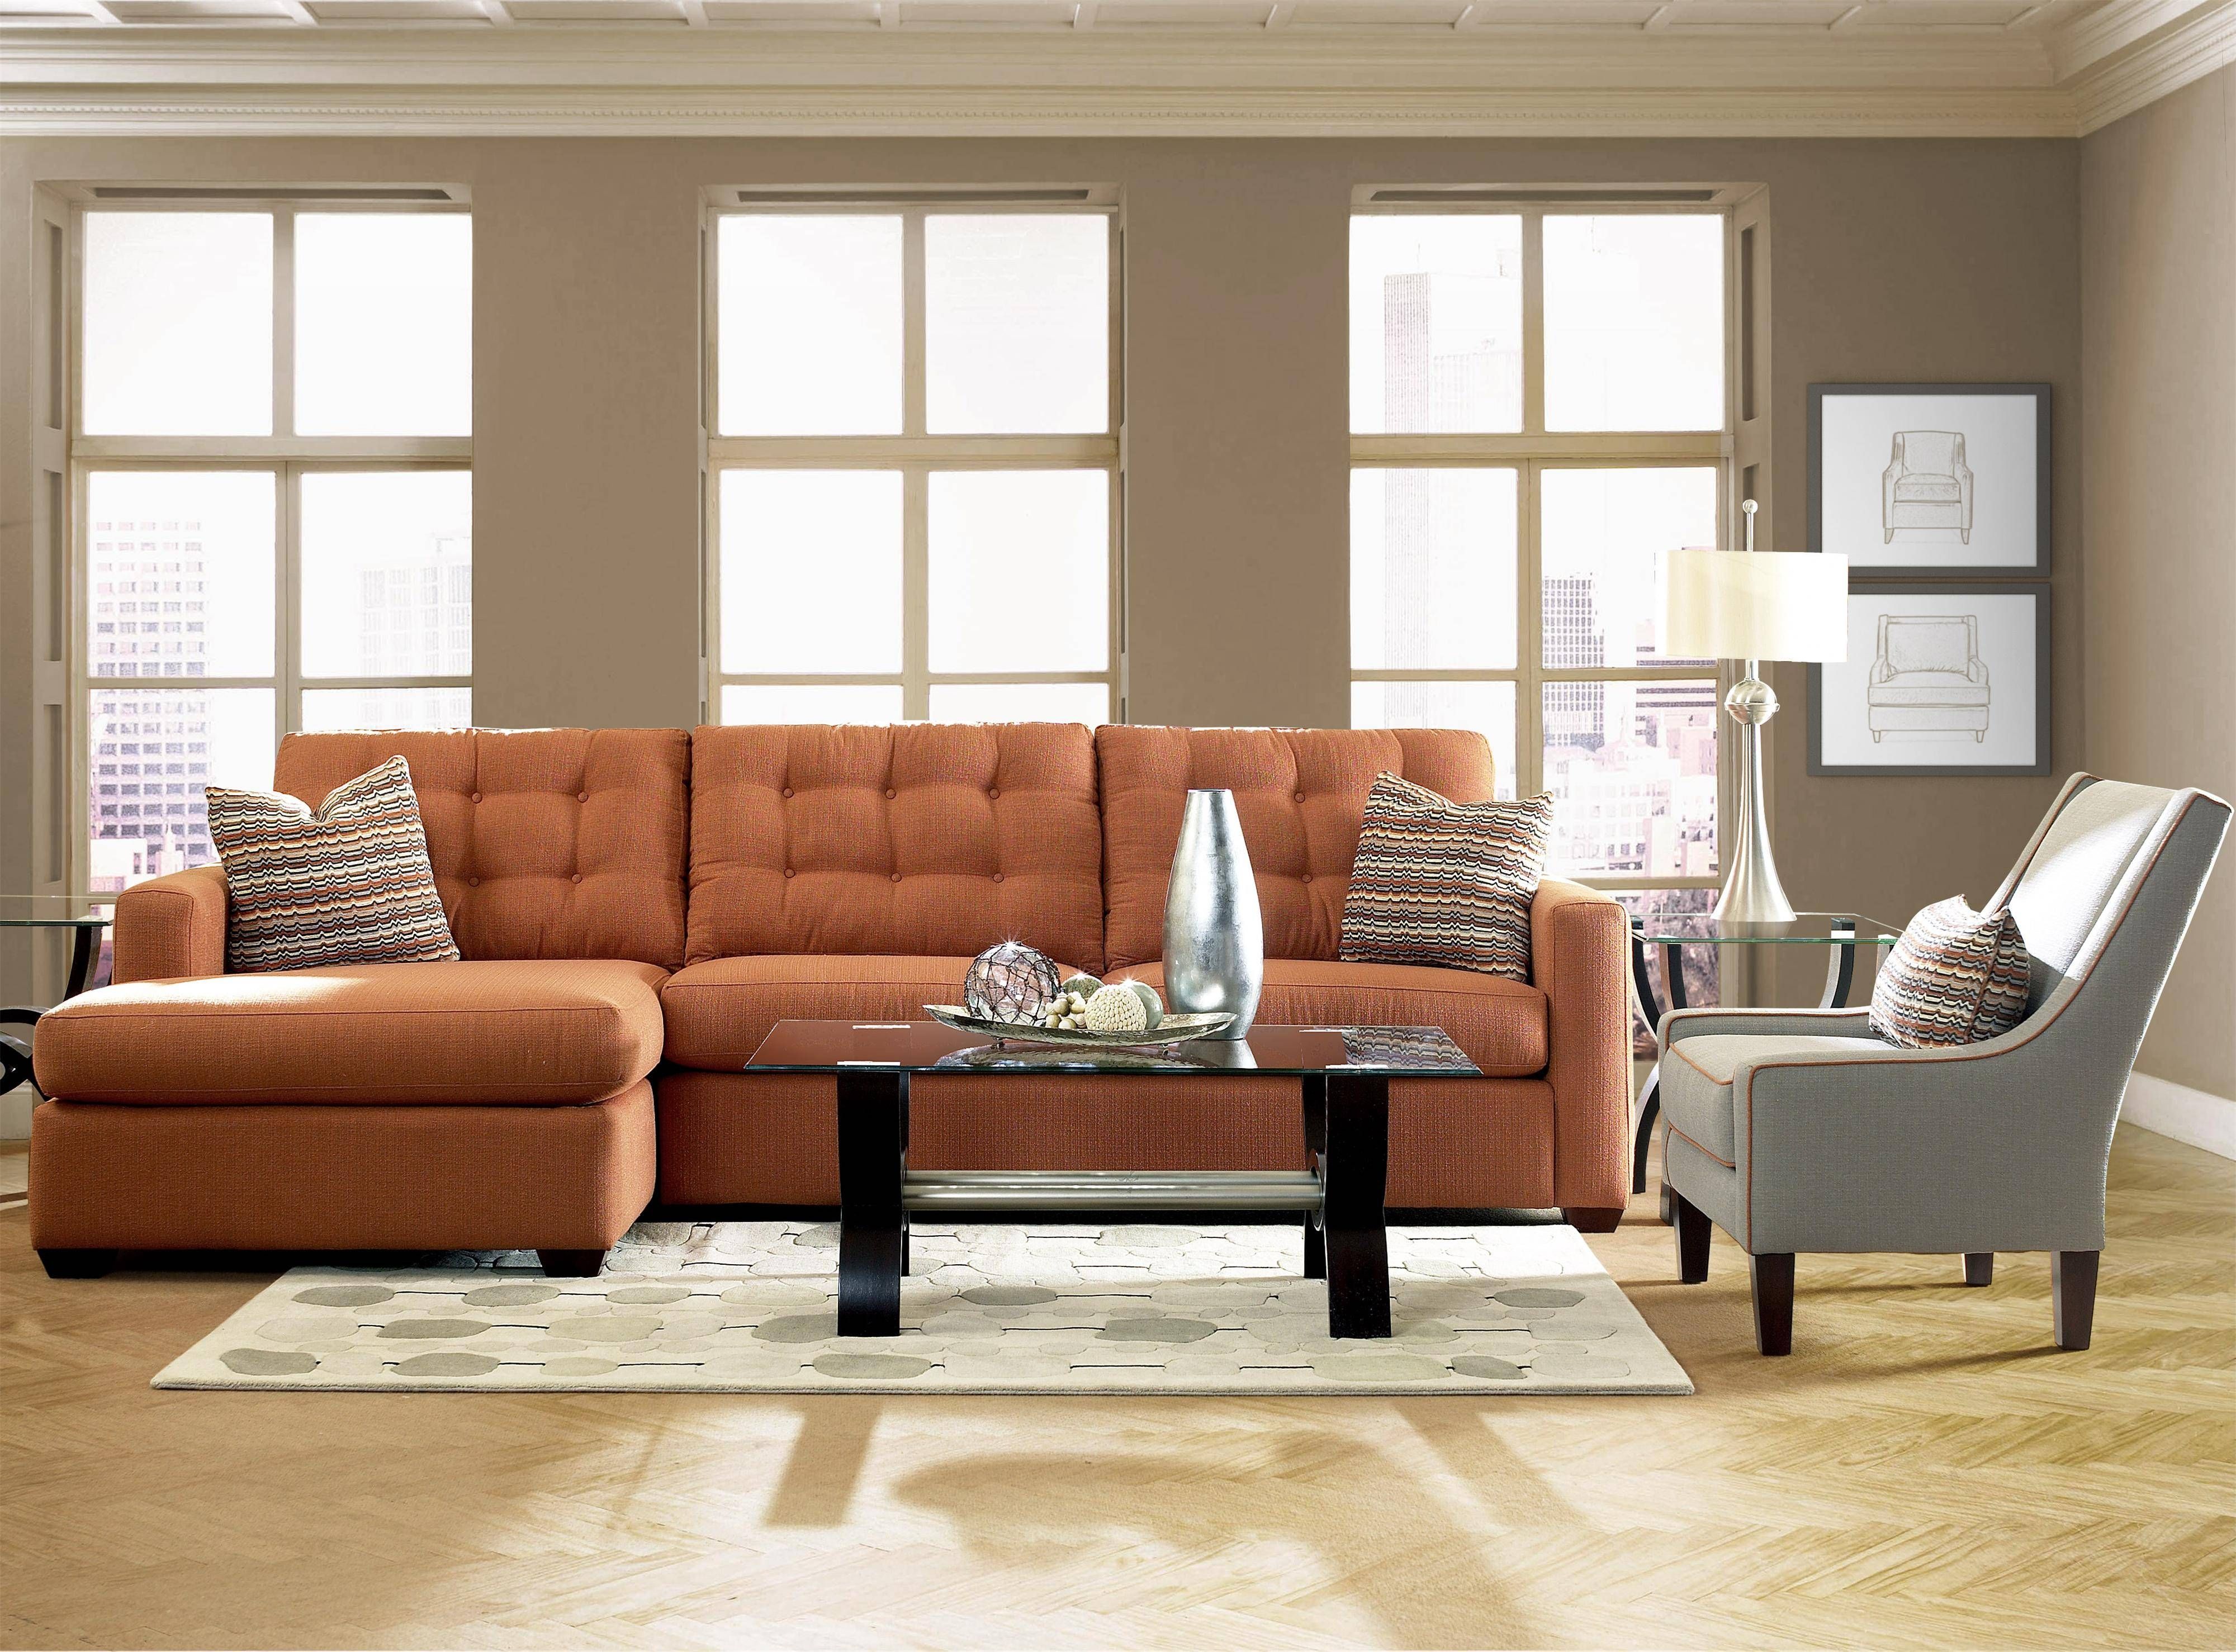 Contemporary Sectional Sofa With Left Facing Chaise Lounge For Sofas And Chaises Lounge Sets 